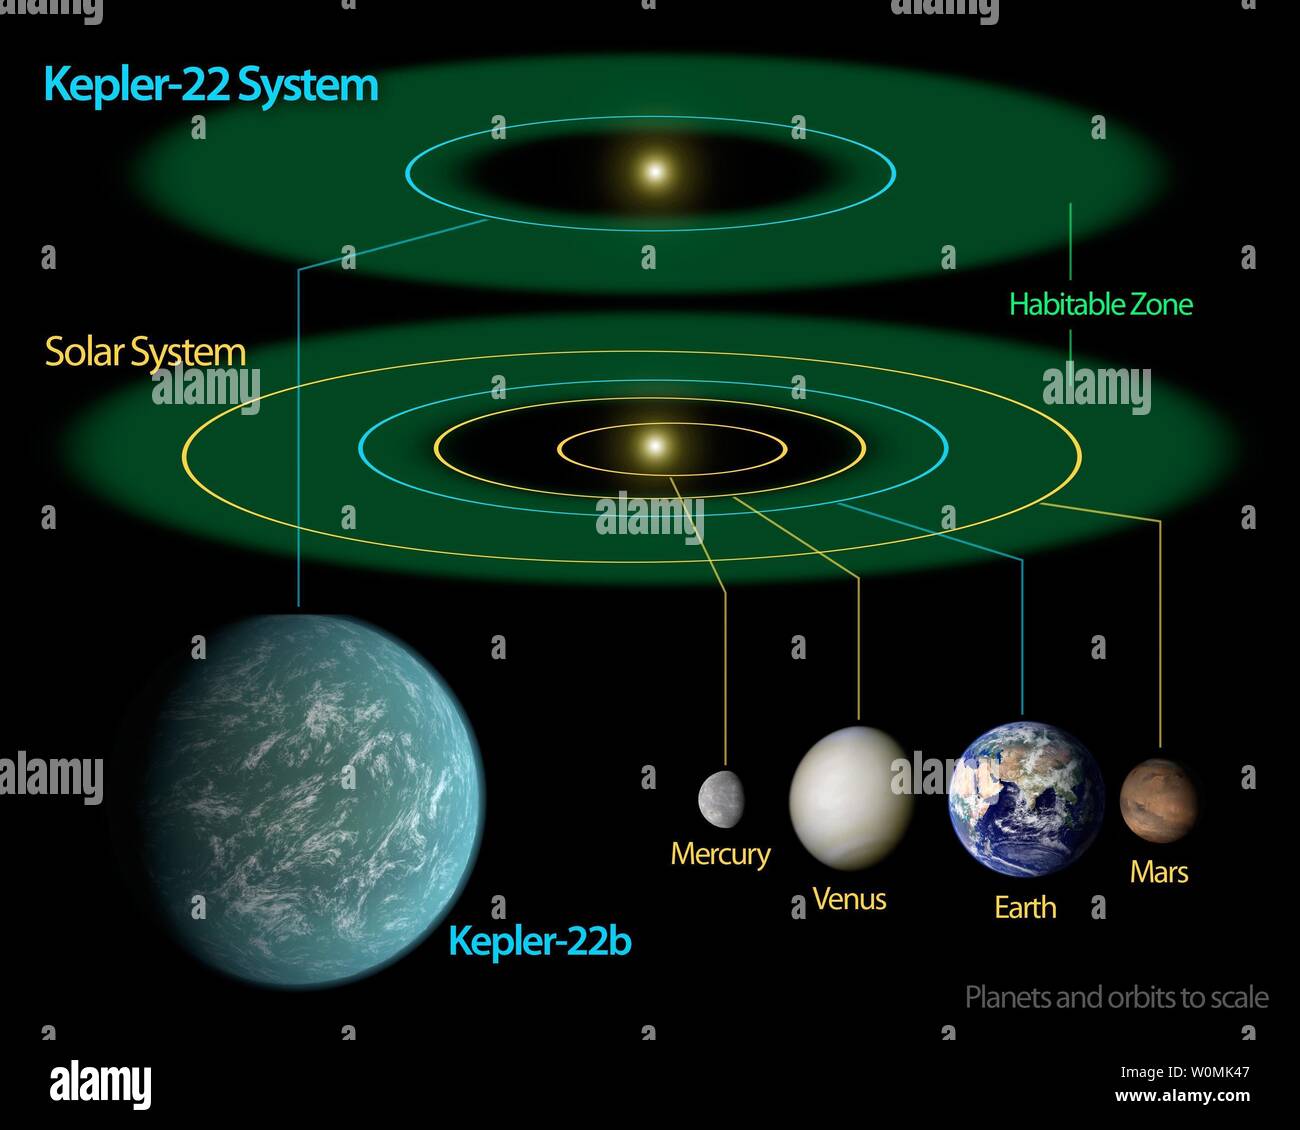 NASA's announced December 5, 2011 that the Kepler mission has confirmed its first planet, Kepler-22b, in the 'habitable zone,' the region where liquid water could exist on a planetÕs surface.This diagram compares our own solar system to Kepler-22. The habitable zone is the sweet spot around a star where temperatures are right for water to exist in its liquid form. Liquid water is essential for life on Earth. Kepler-22's star is a bit smaller than our sun, so its habitable zone is slightly closer in. The diagram shows an artist's rendering of the planet comfortably orbiting within the habitable Stock Photo